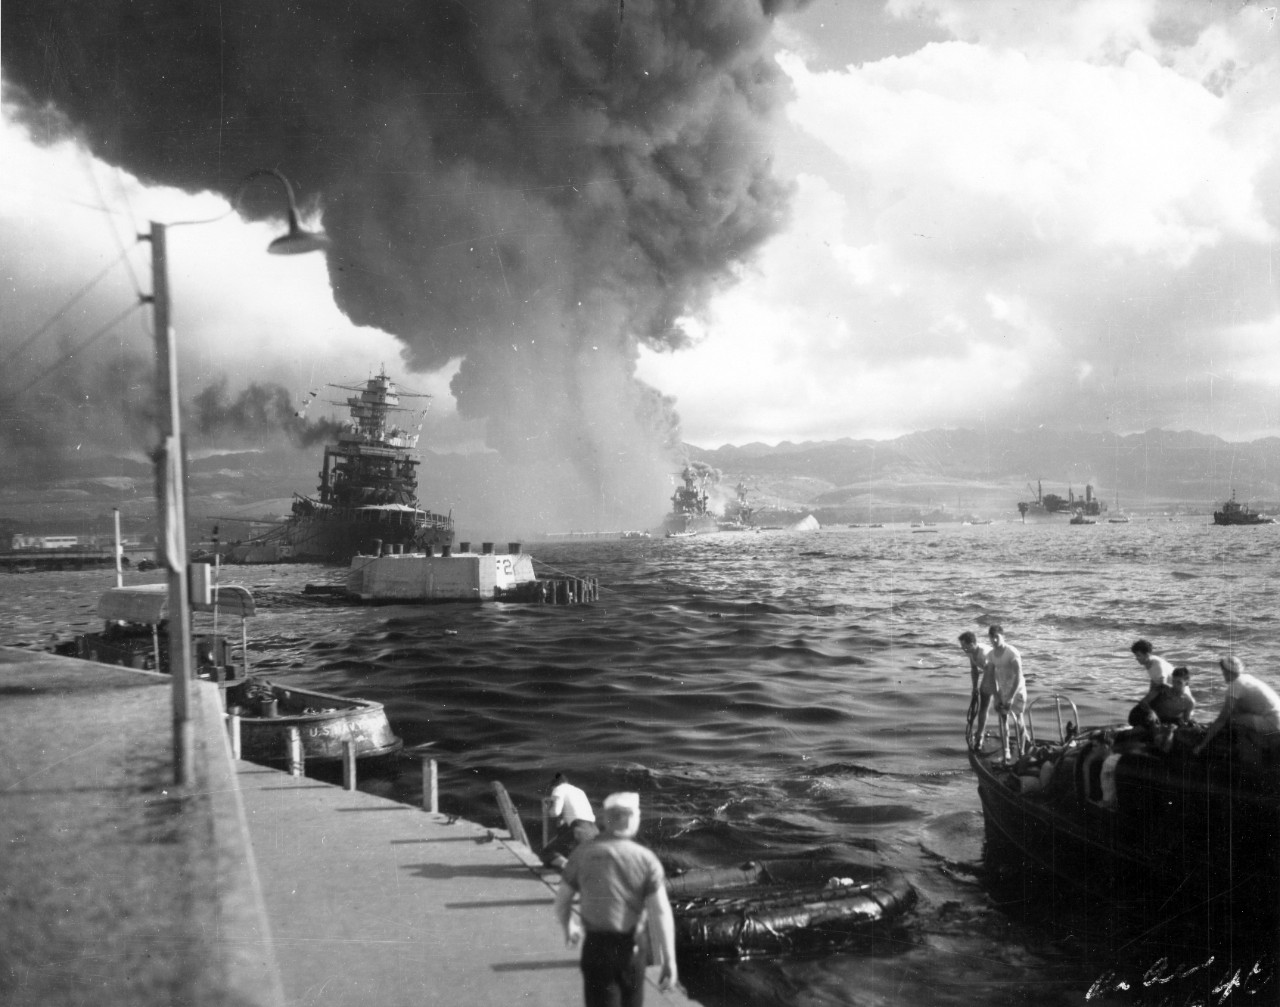 View of harbor with stricken, sinking ships and visible smoke.